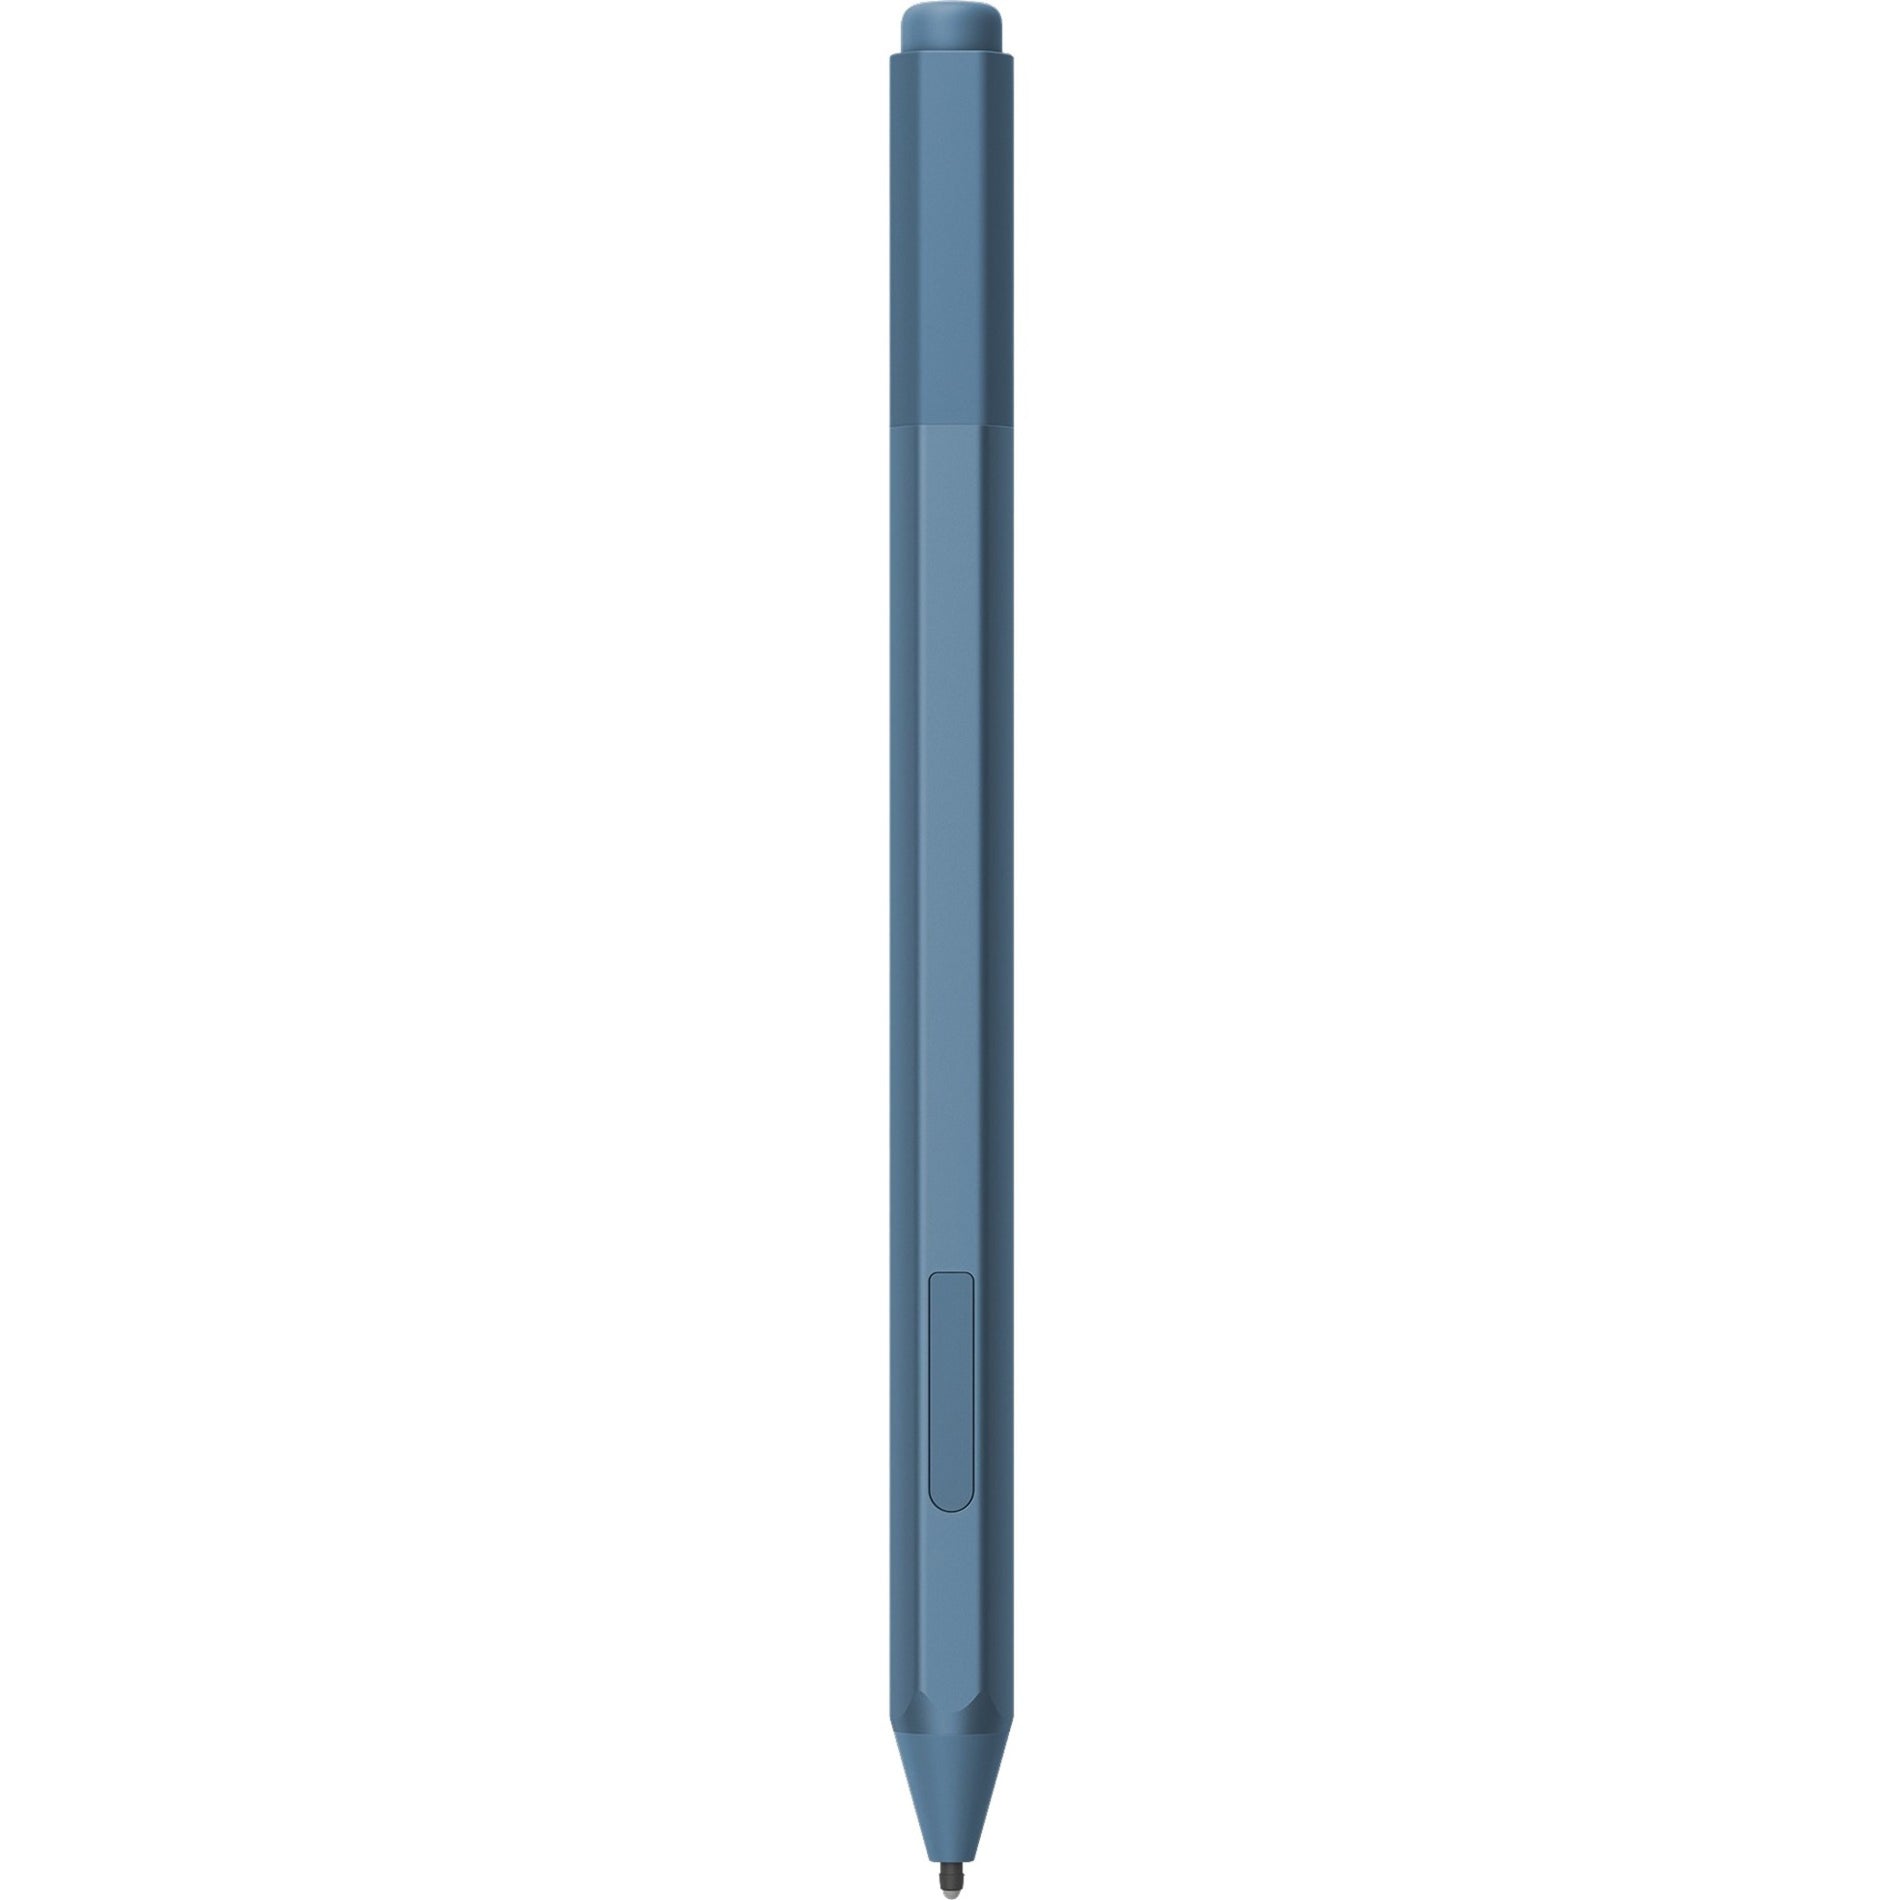 Microsoft EYV-00049 Surface Pen Stylus, Bluetooth Enabled Tablet and Notebook Stylus